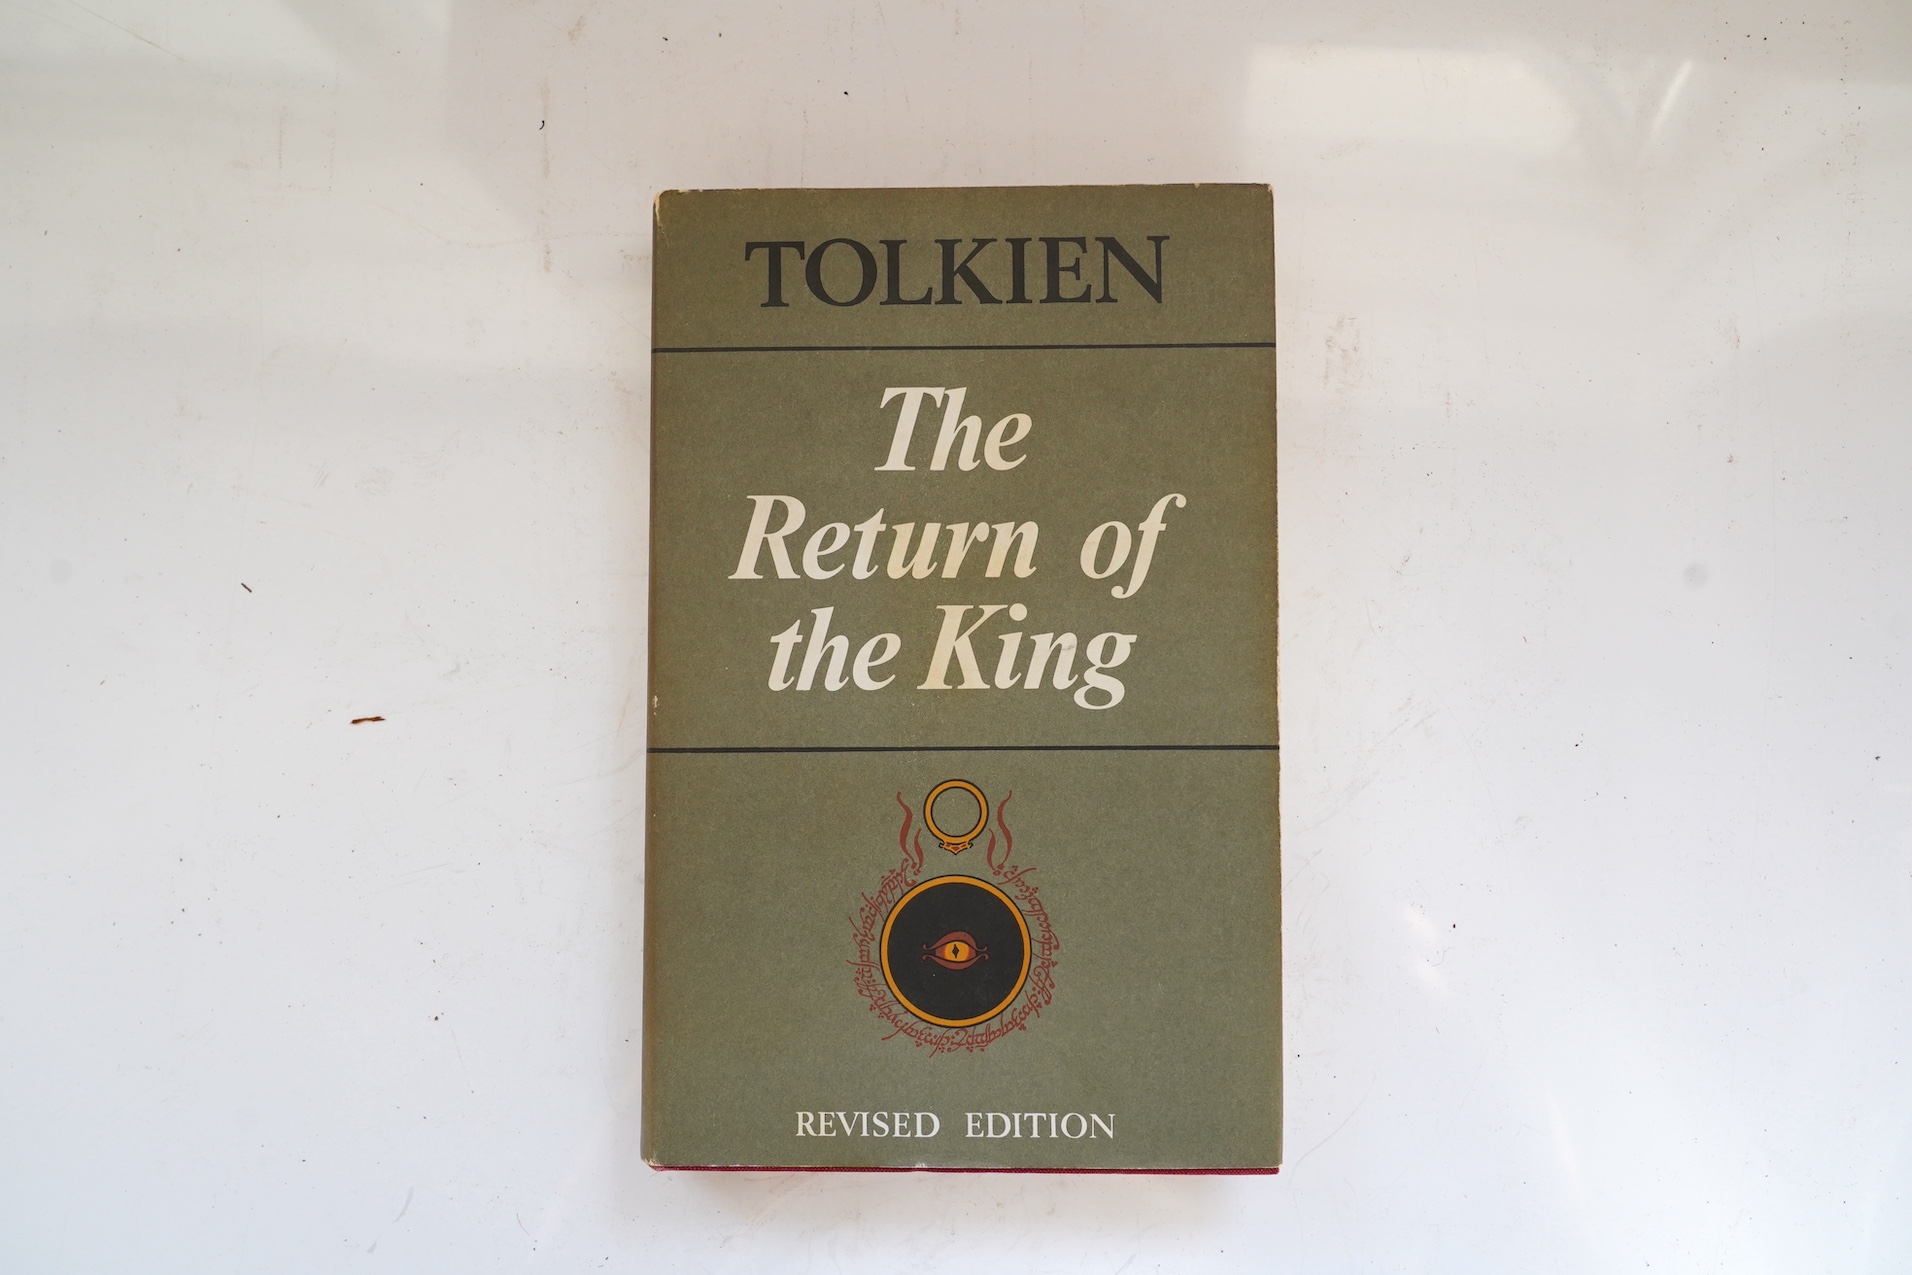 Tolkien, J.R.R. - The Lord of the Rings. 2nd edition, 6th impression, 3 vols. text map and 3 folded maps (all with outline colour); publisher's cloth and d/wrappers. 1971; sold with: Hemingway, Ernest - Across the River